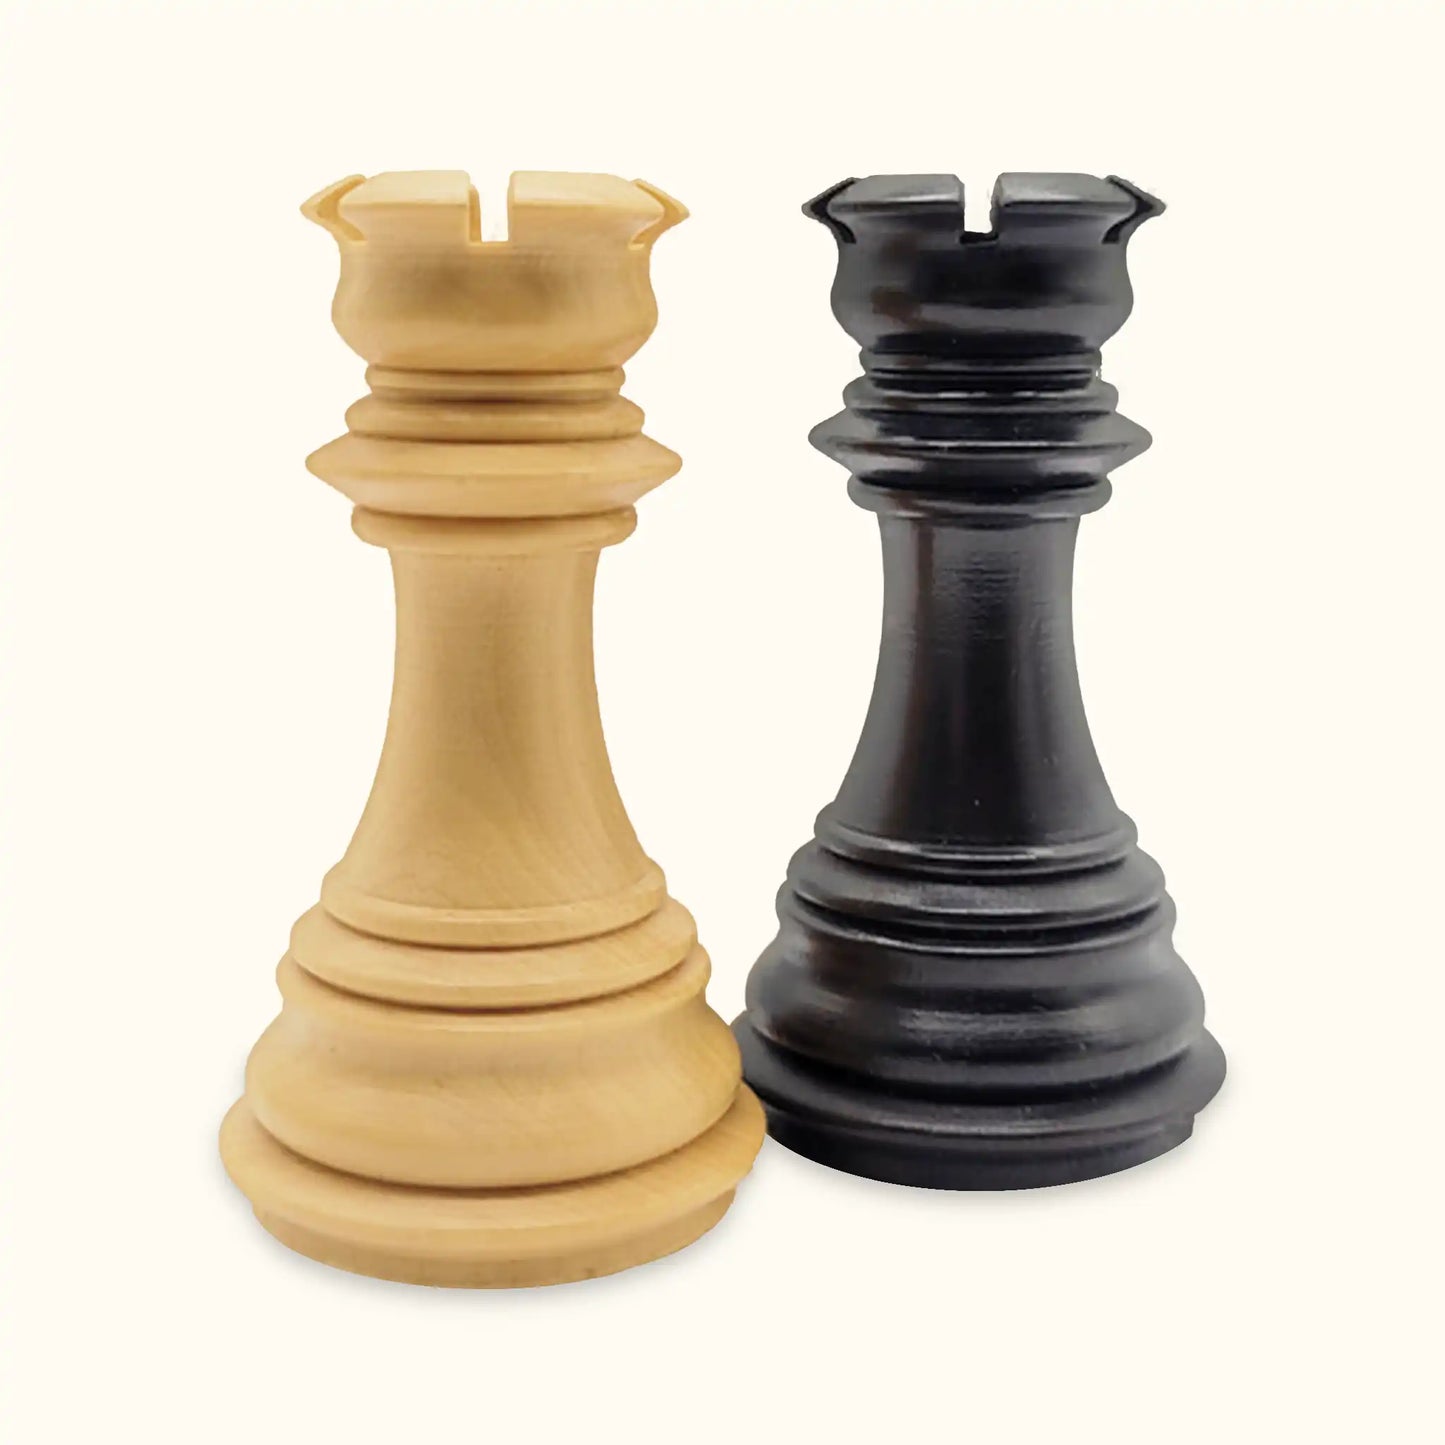 Chess pieces Imperial ebonized rook